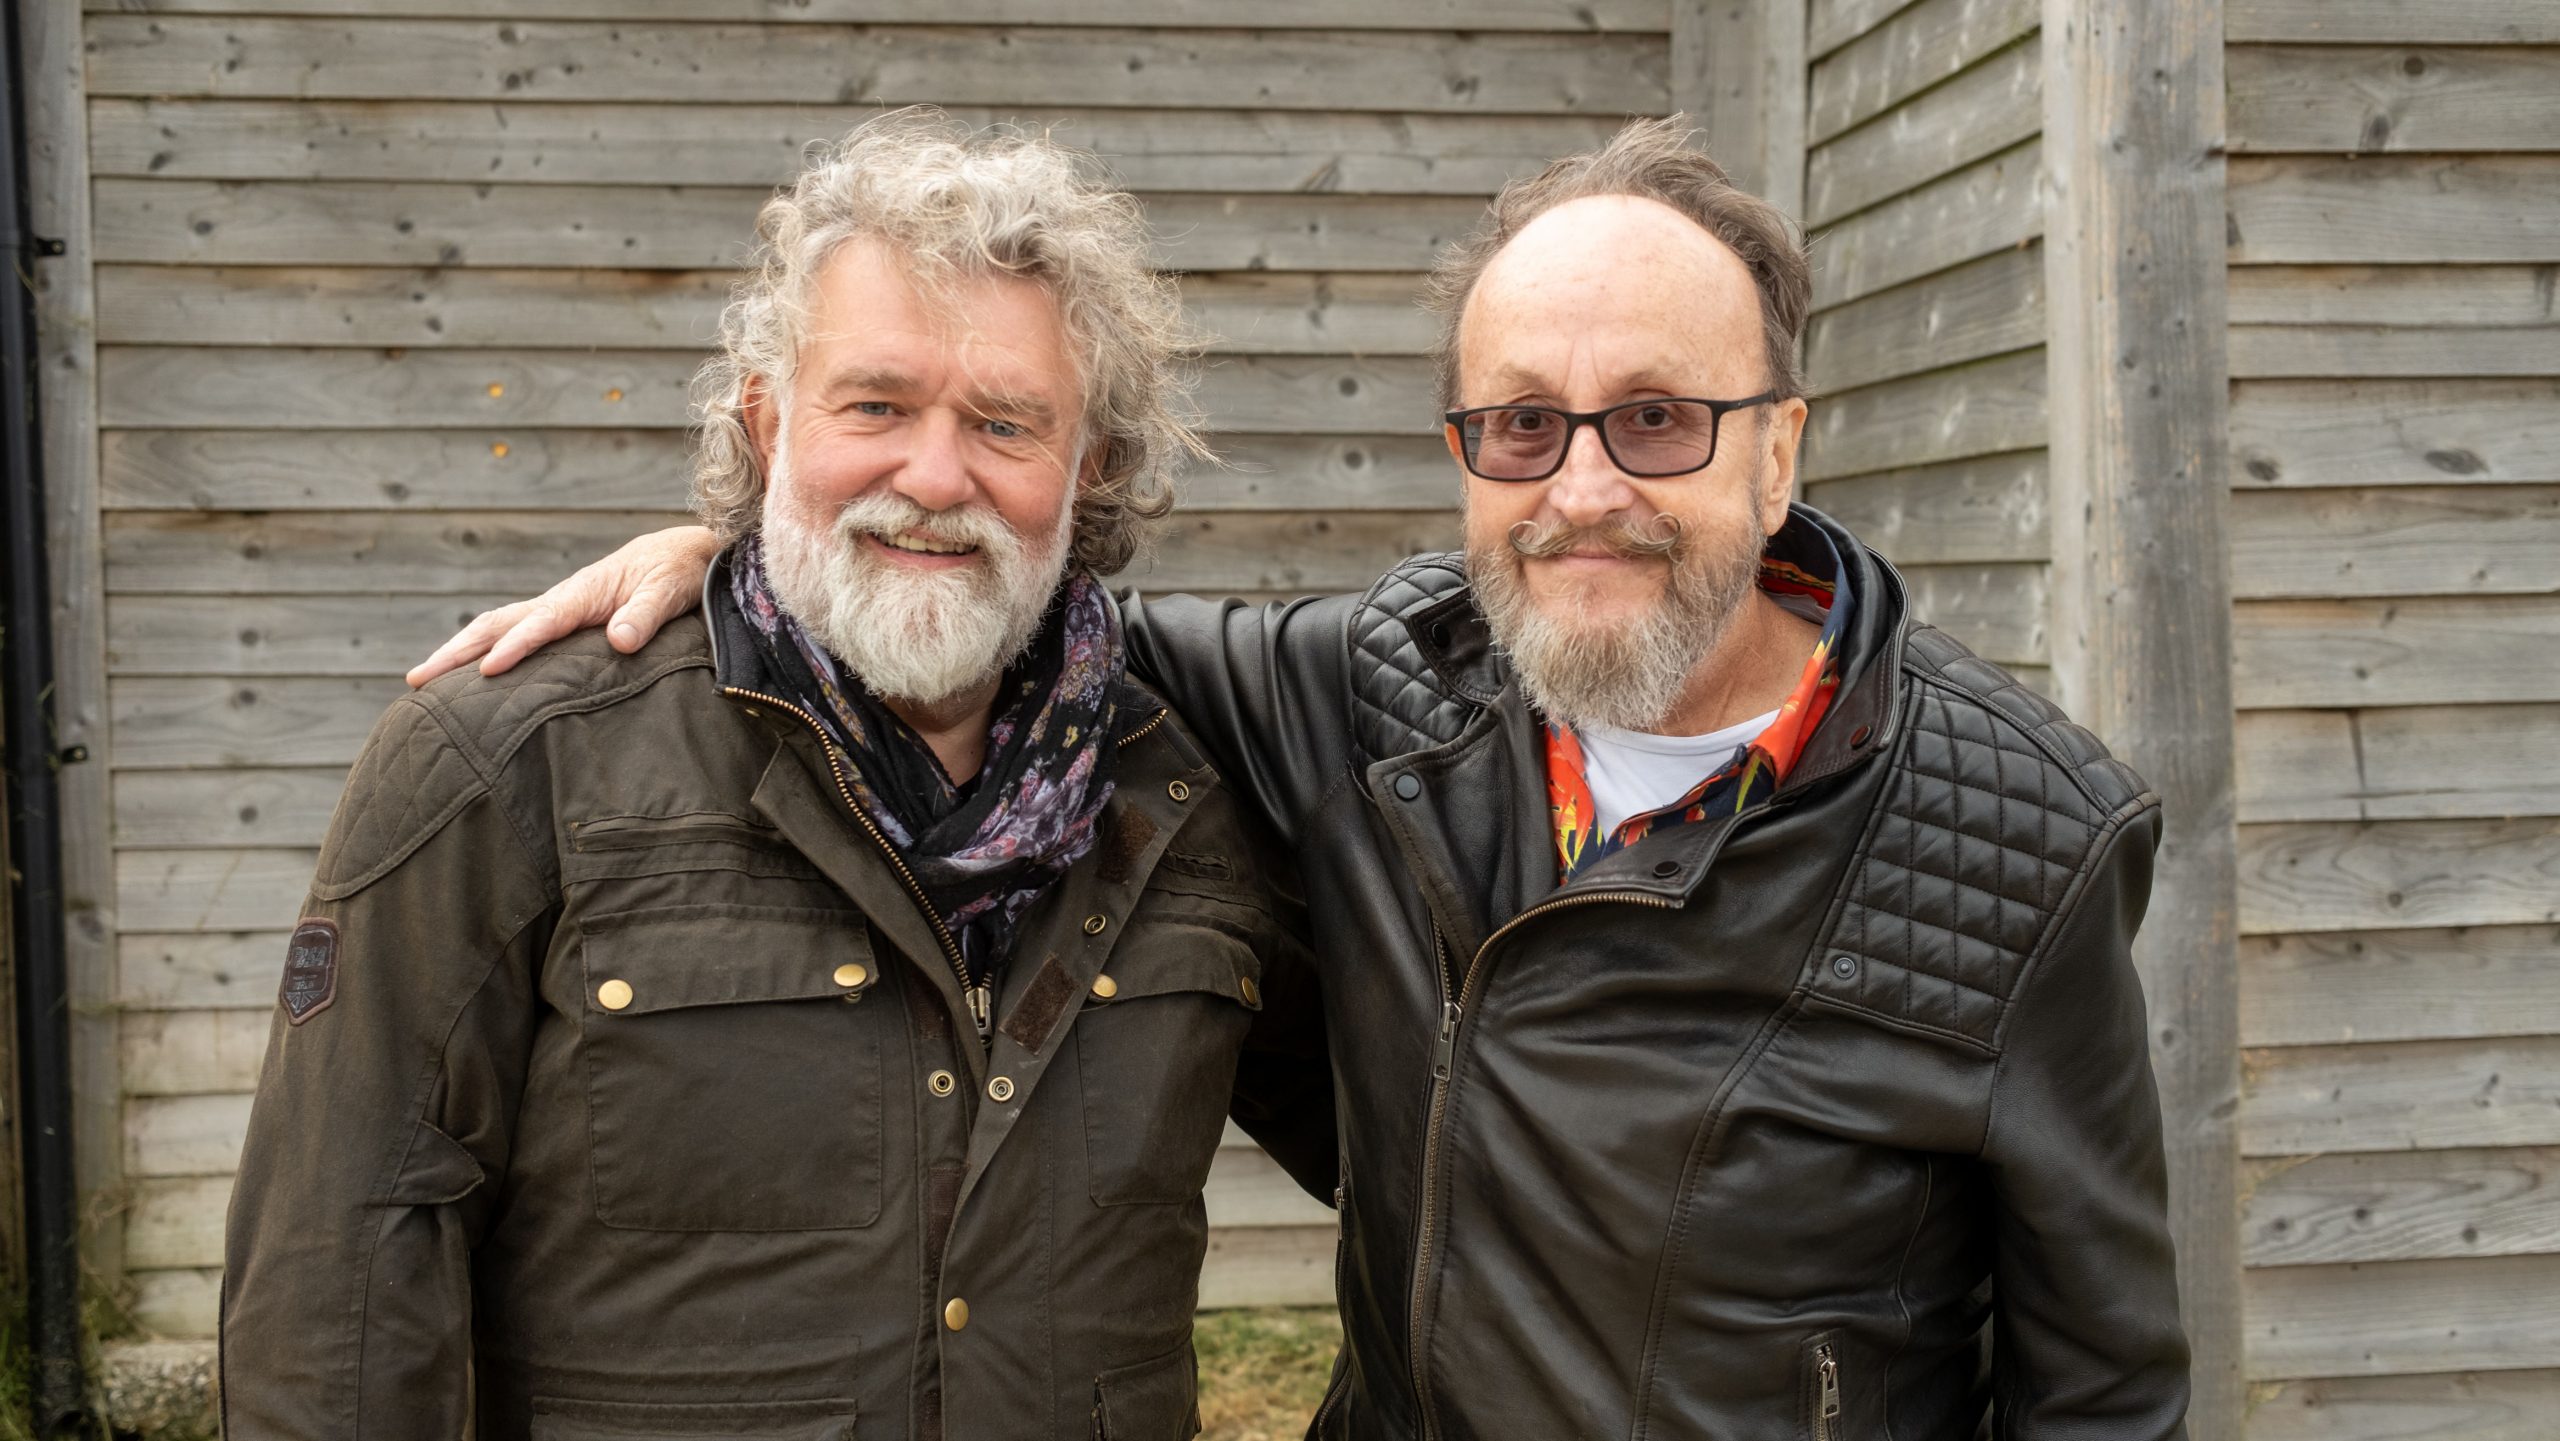 Inside Hairy Bikers’ heart-wrenching final TV scenes after Dave Myers’ tragic death at 66